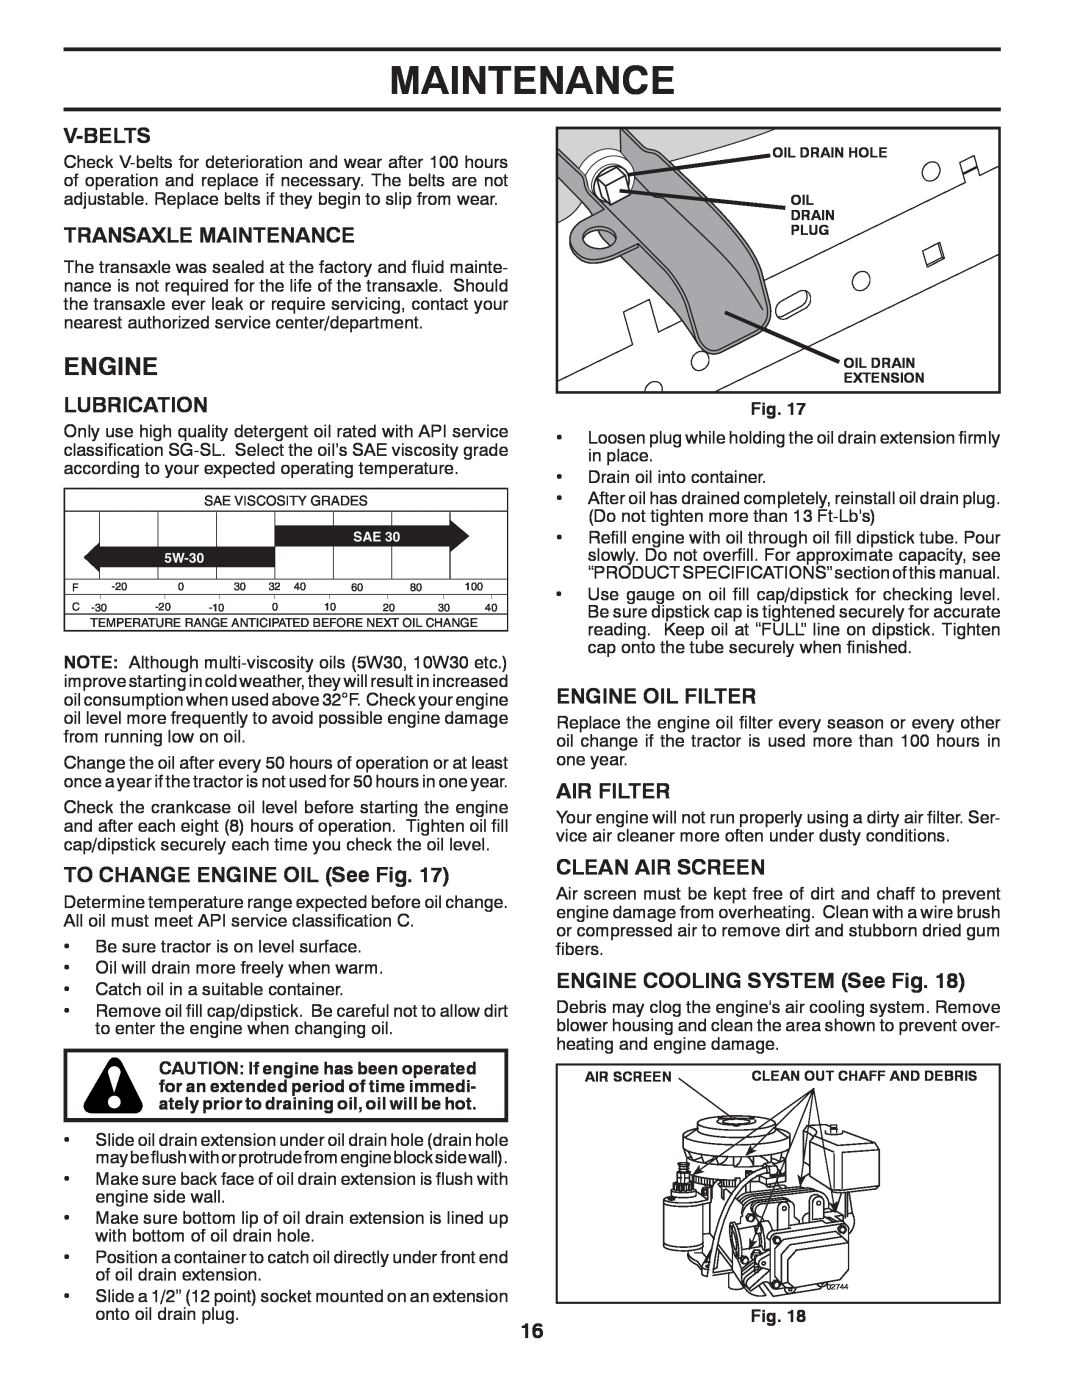 Ariens 935335 42 V-Belts, Transaxle Maintenance, Lubrication, TO CHANGE ENGINE OIL See Fig, Engine Oil Filter 